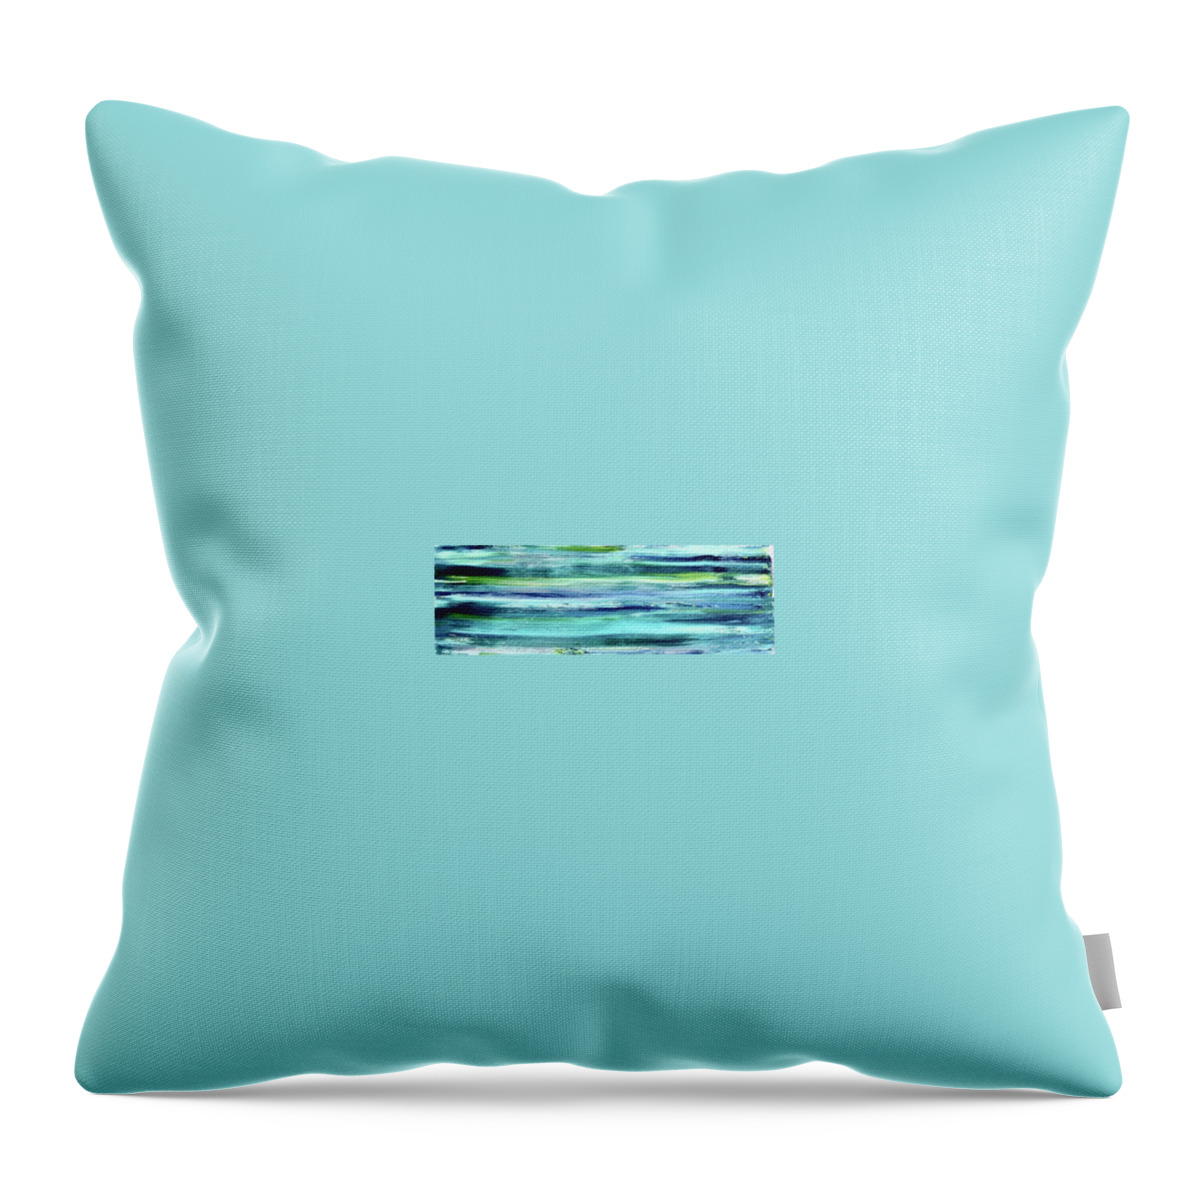 Driftwood Blue Throw Pillow featuring the painting Driftwood Blue by M West